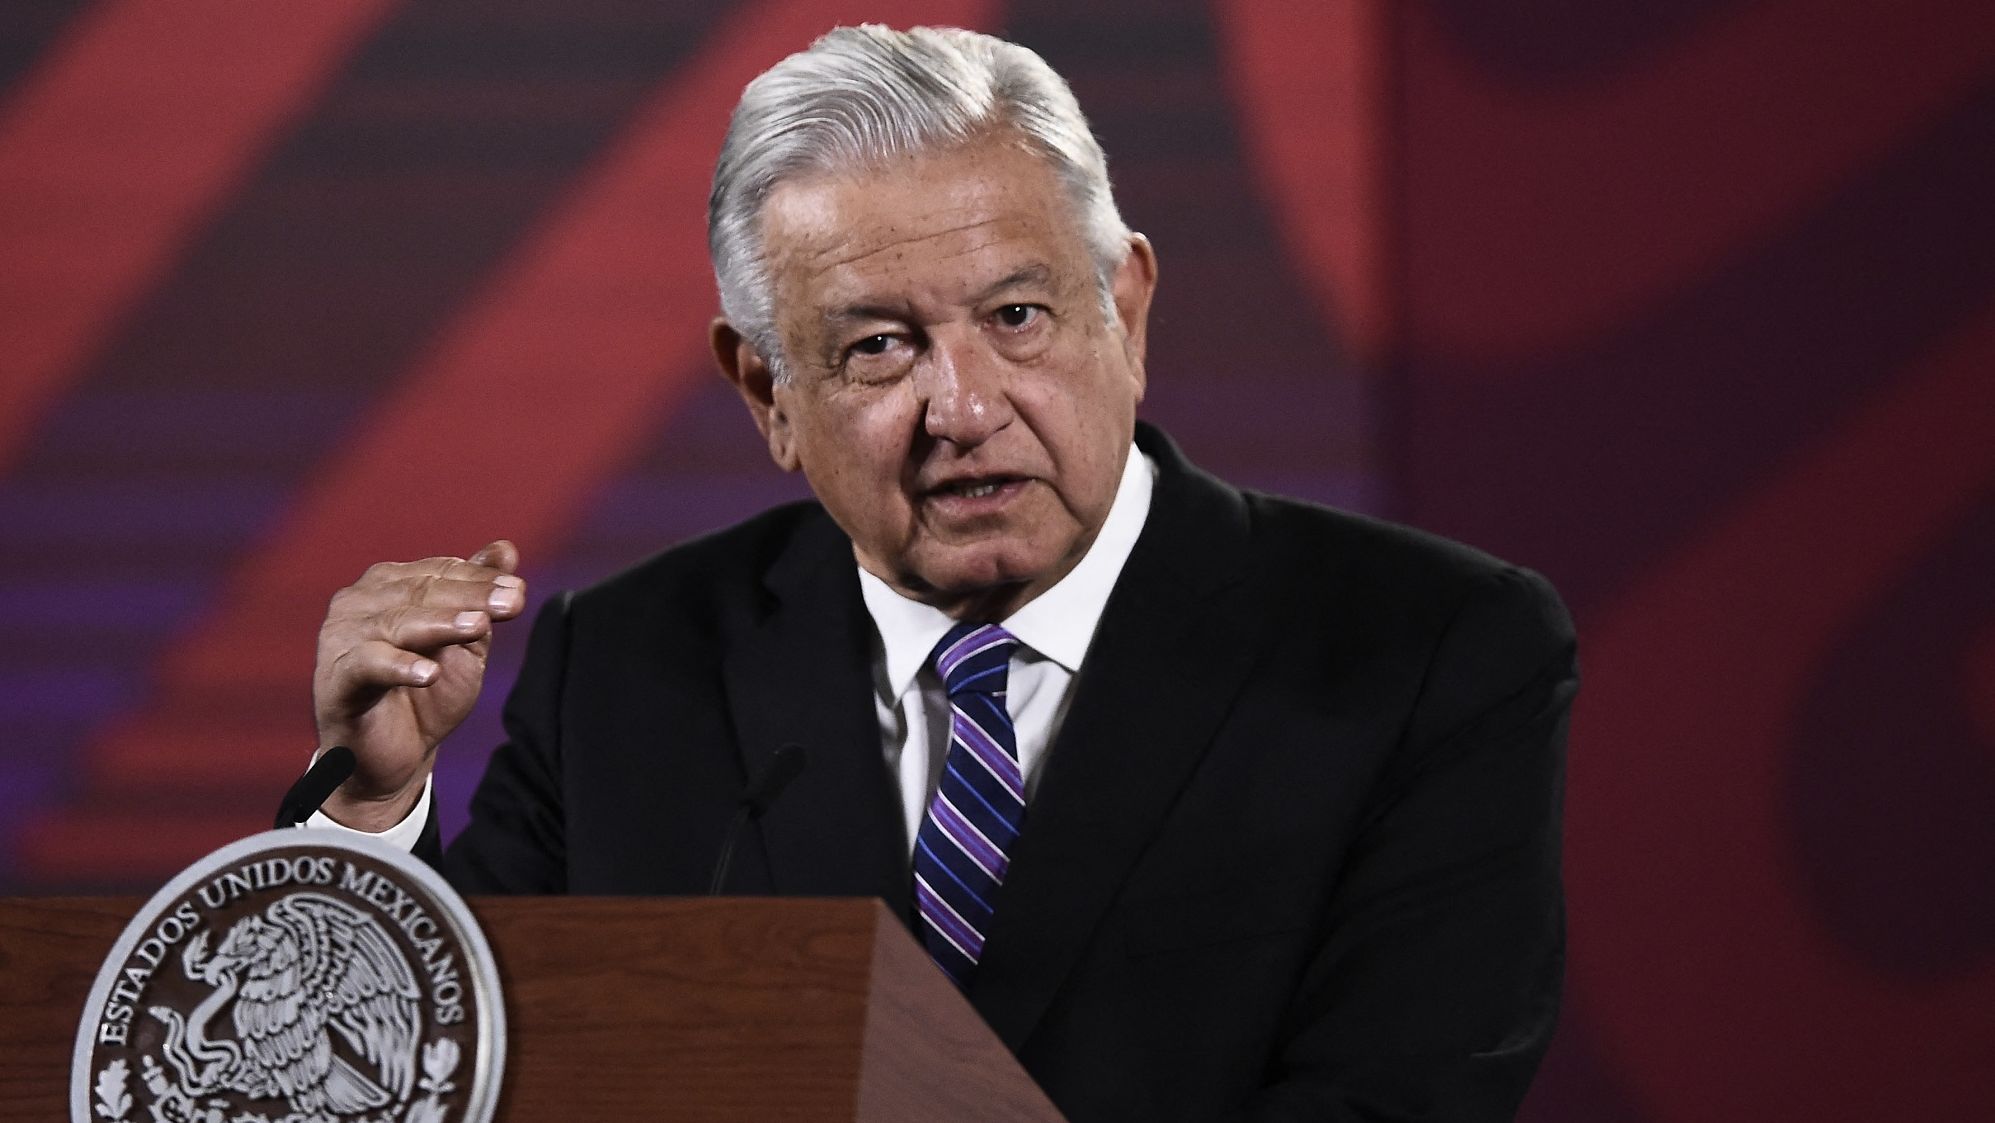 Mexico's President Andres Manuel Lopez Obrador speaks during his daily morning press conference in Mexico City on April 11, 2022. (Photo by CLAUDIO CRUZ/AFP via Getty Images)